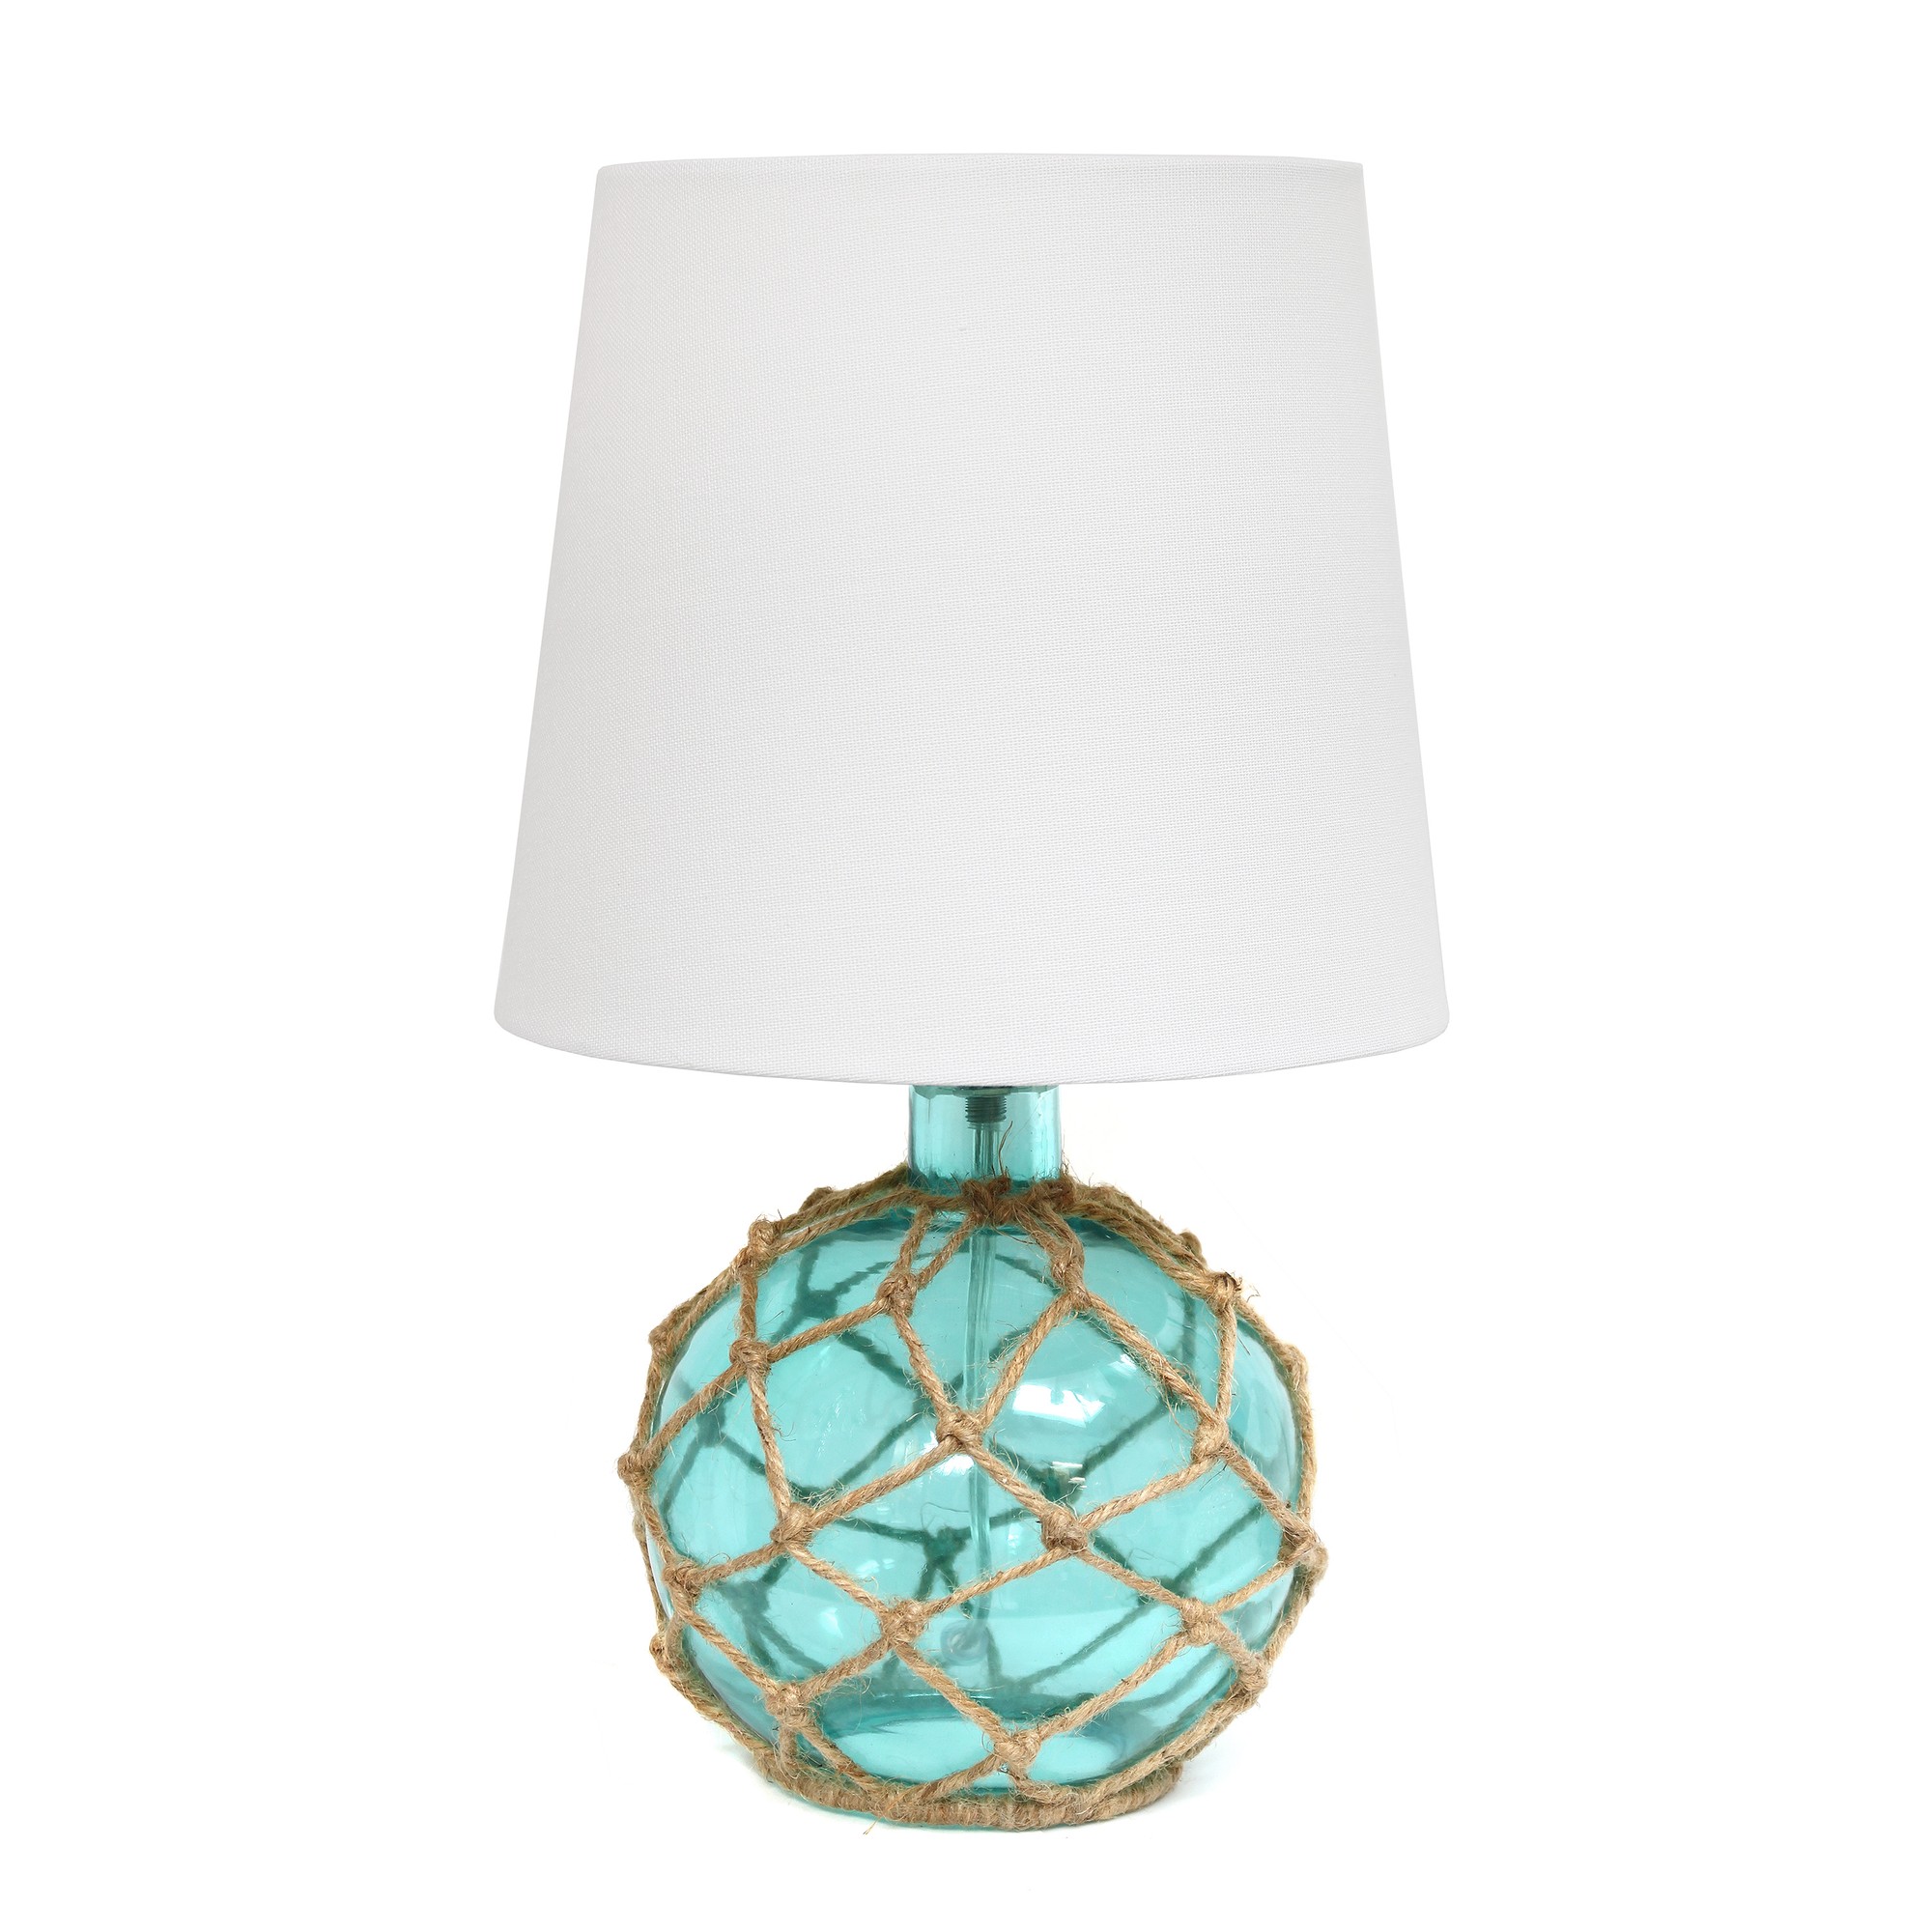 14.75in Glass Rope Table Lamp White Shade Aqua